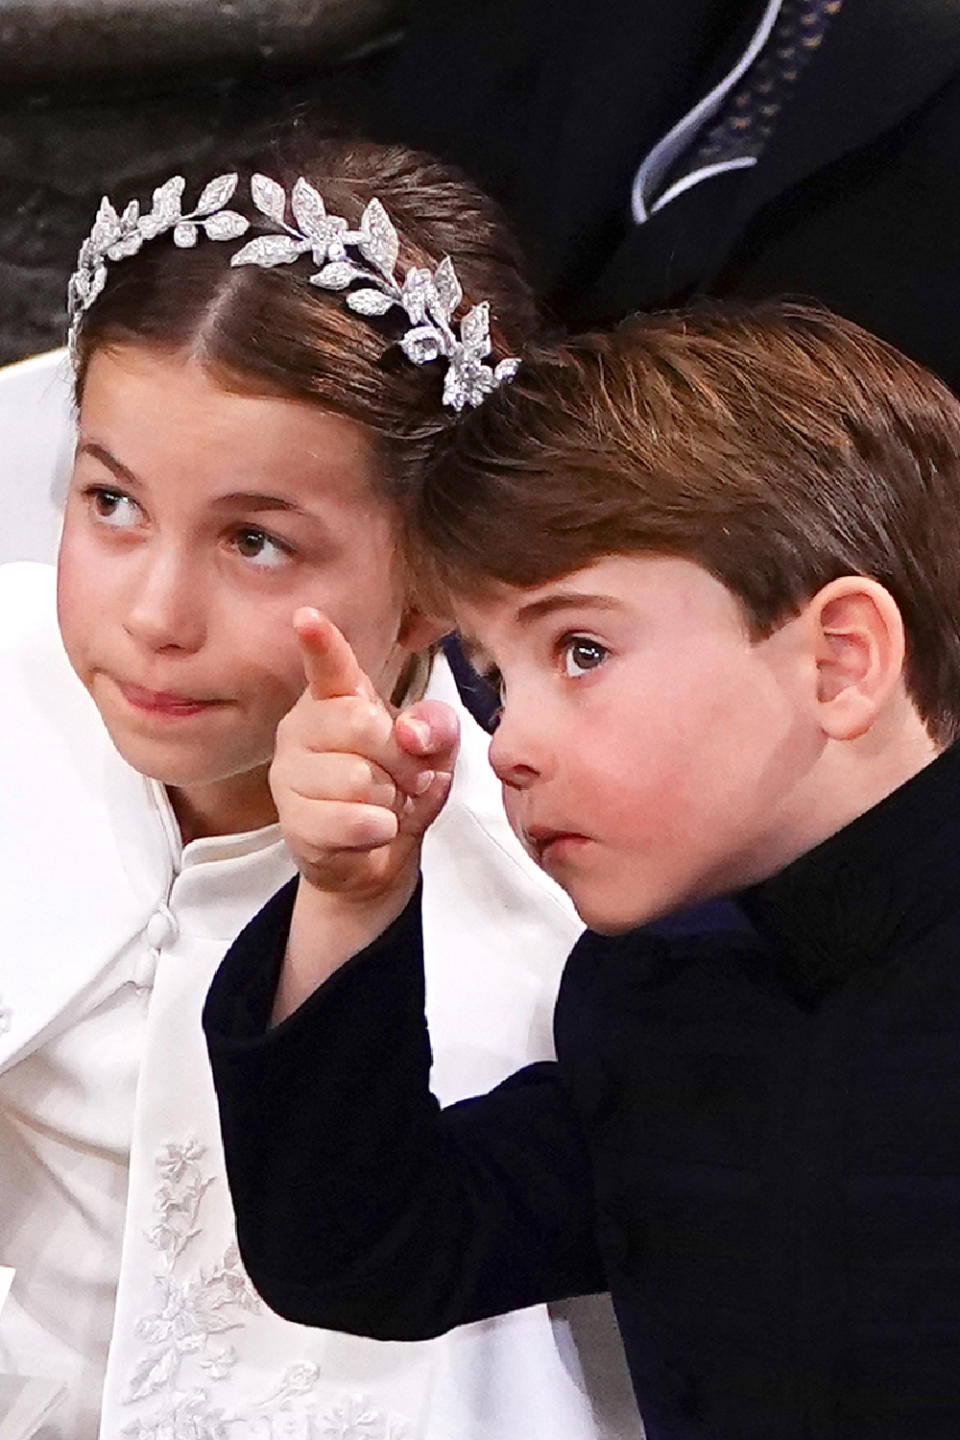 Royal babies don't really do second names